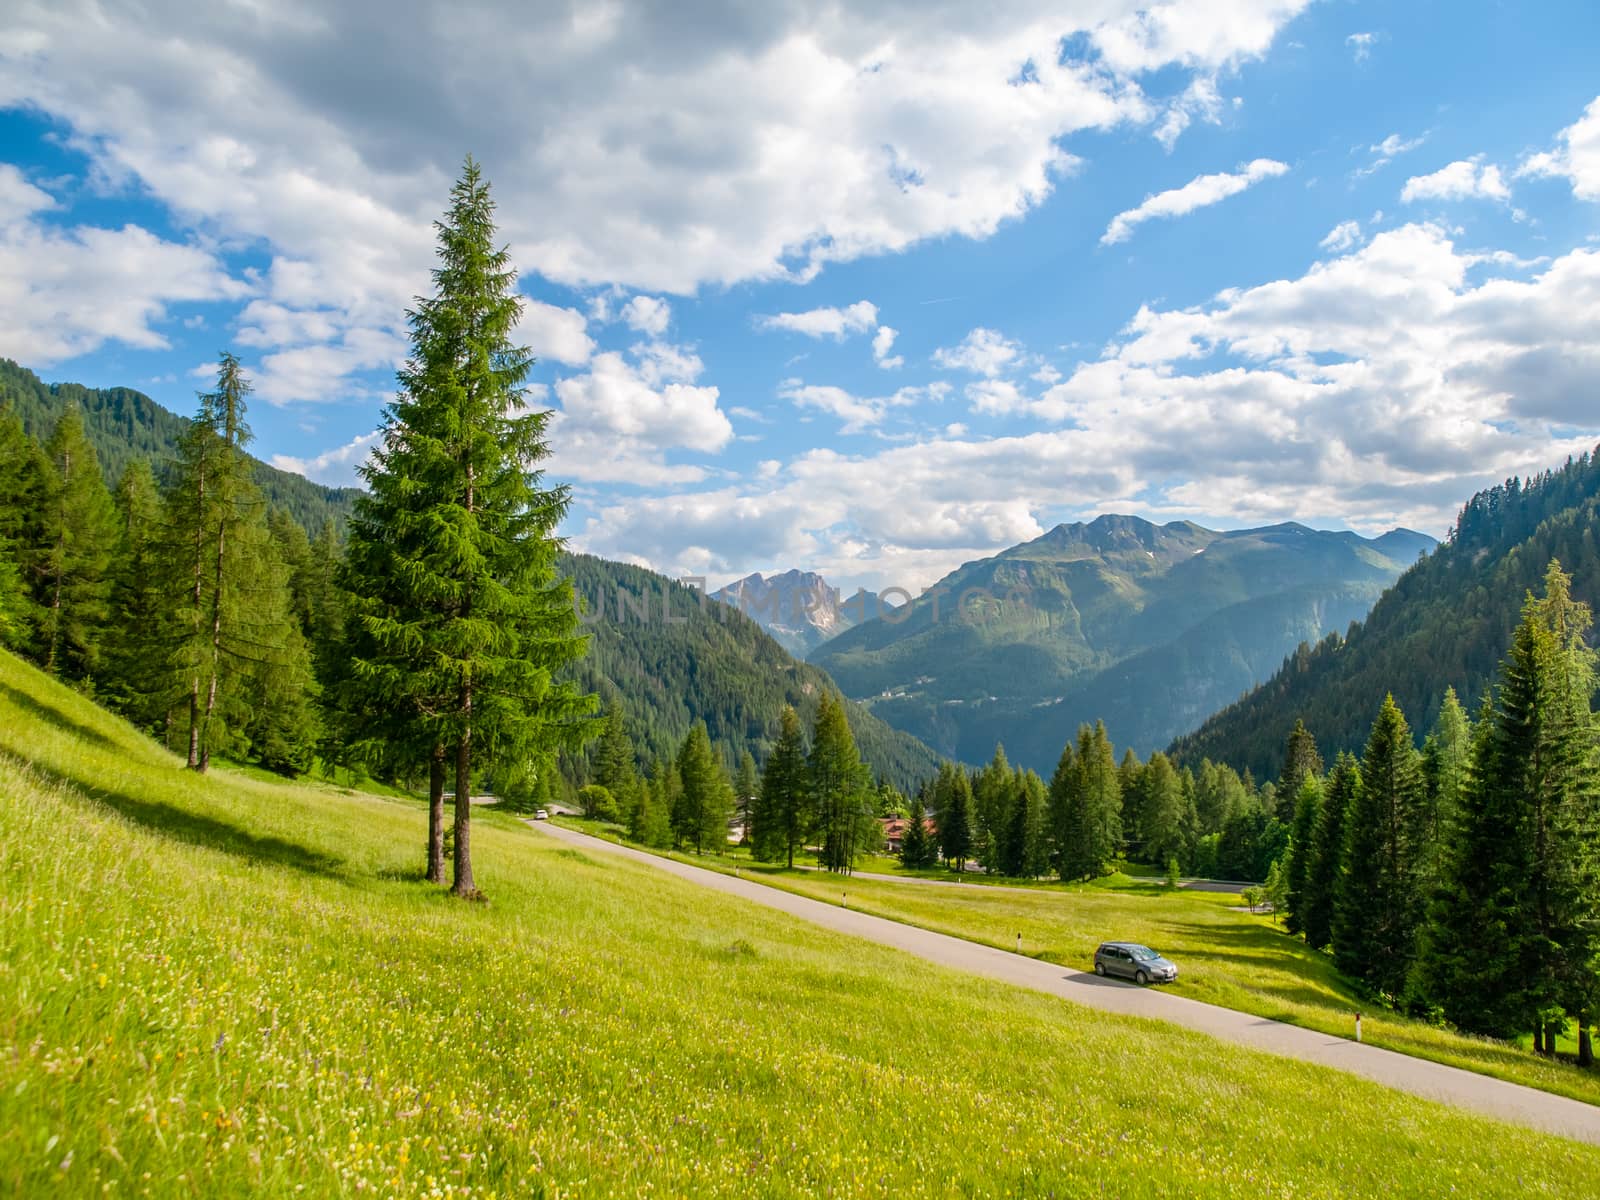 Landscape of Dolomites with green meadows, coniferous trees, blue sky, white clouds and rocky mountains by pyty